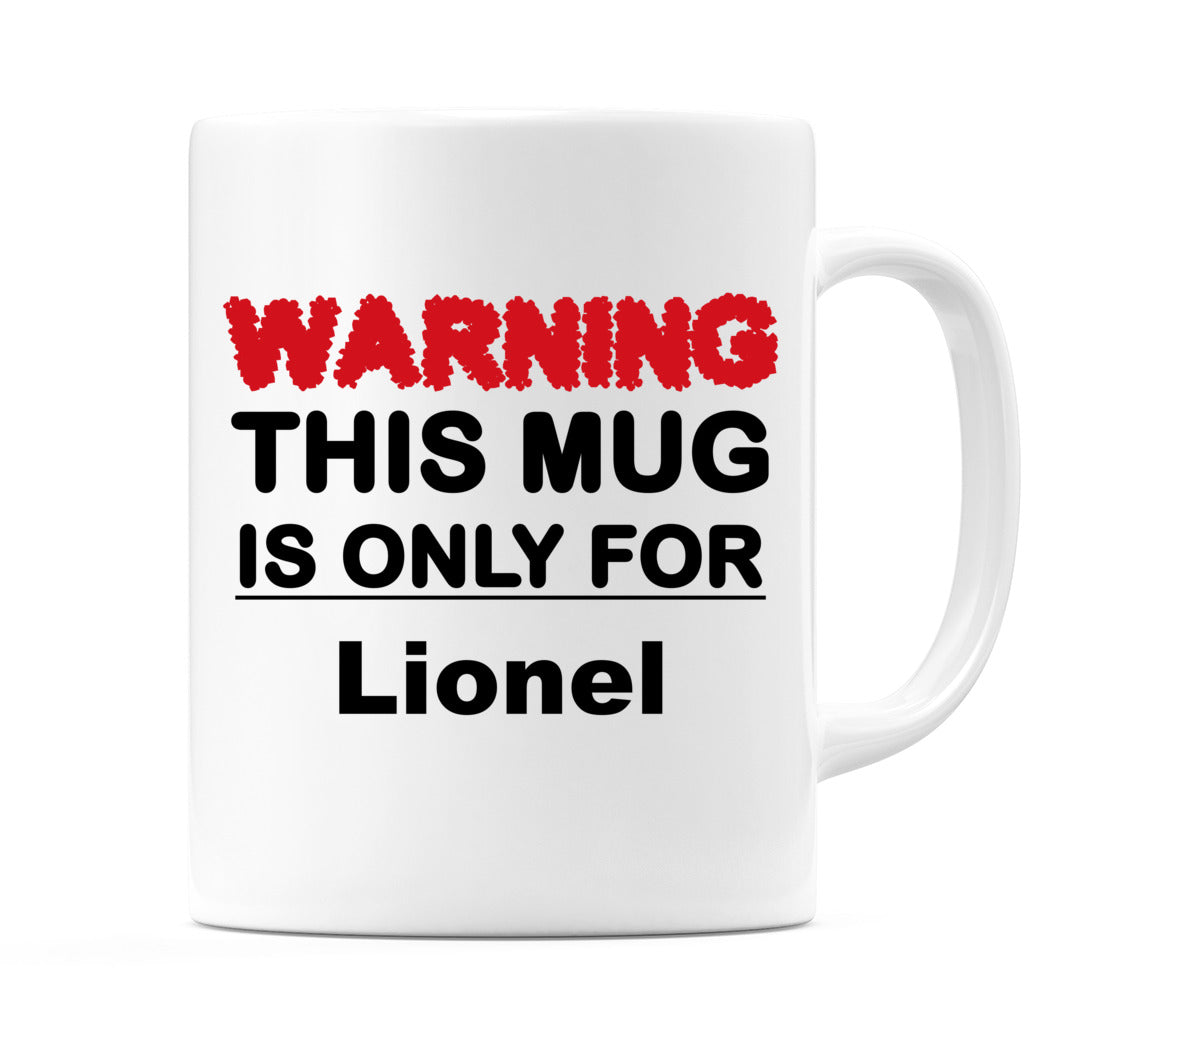 Warning This Mug is ONLY for Lionel Mug